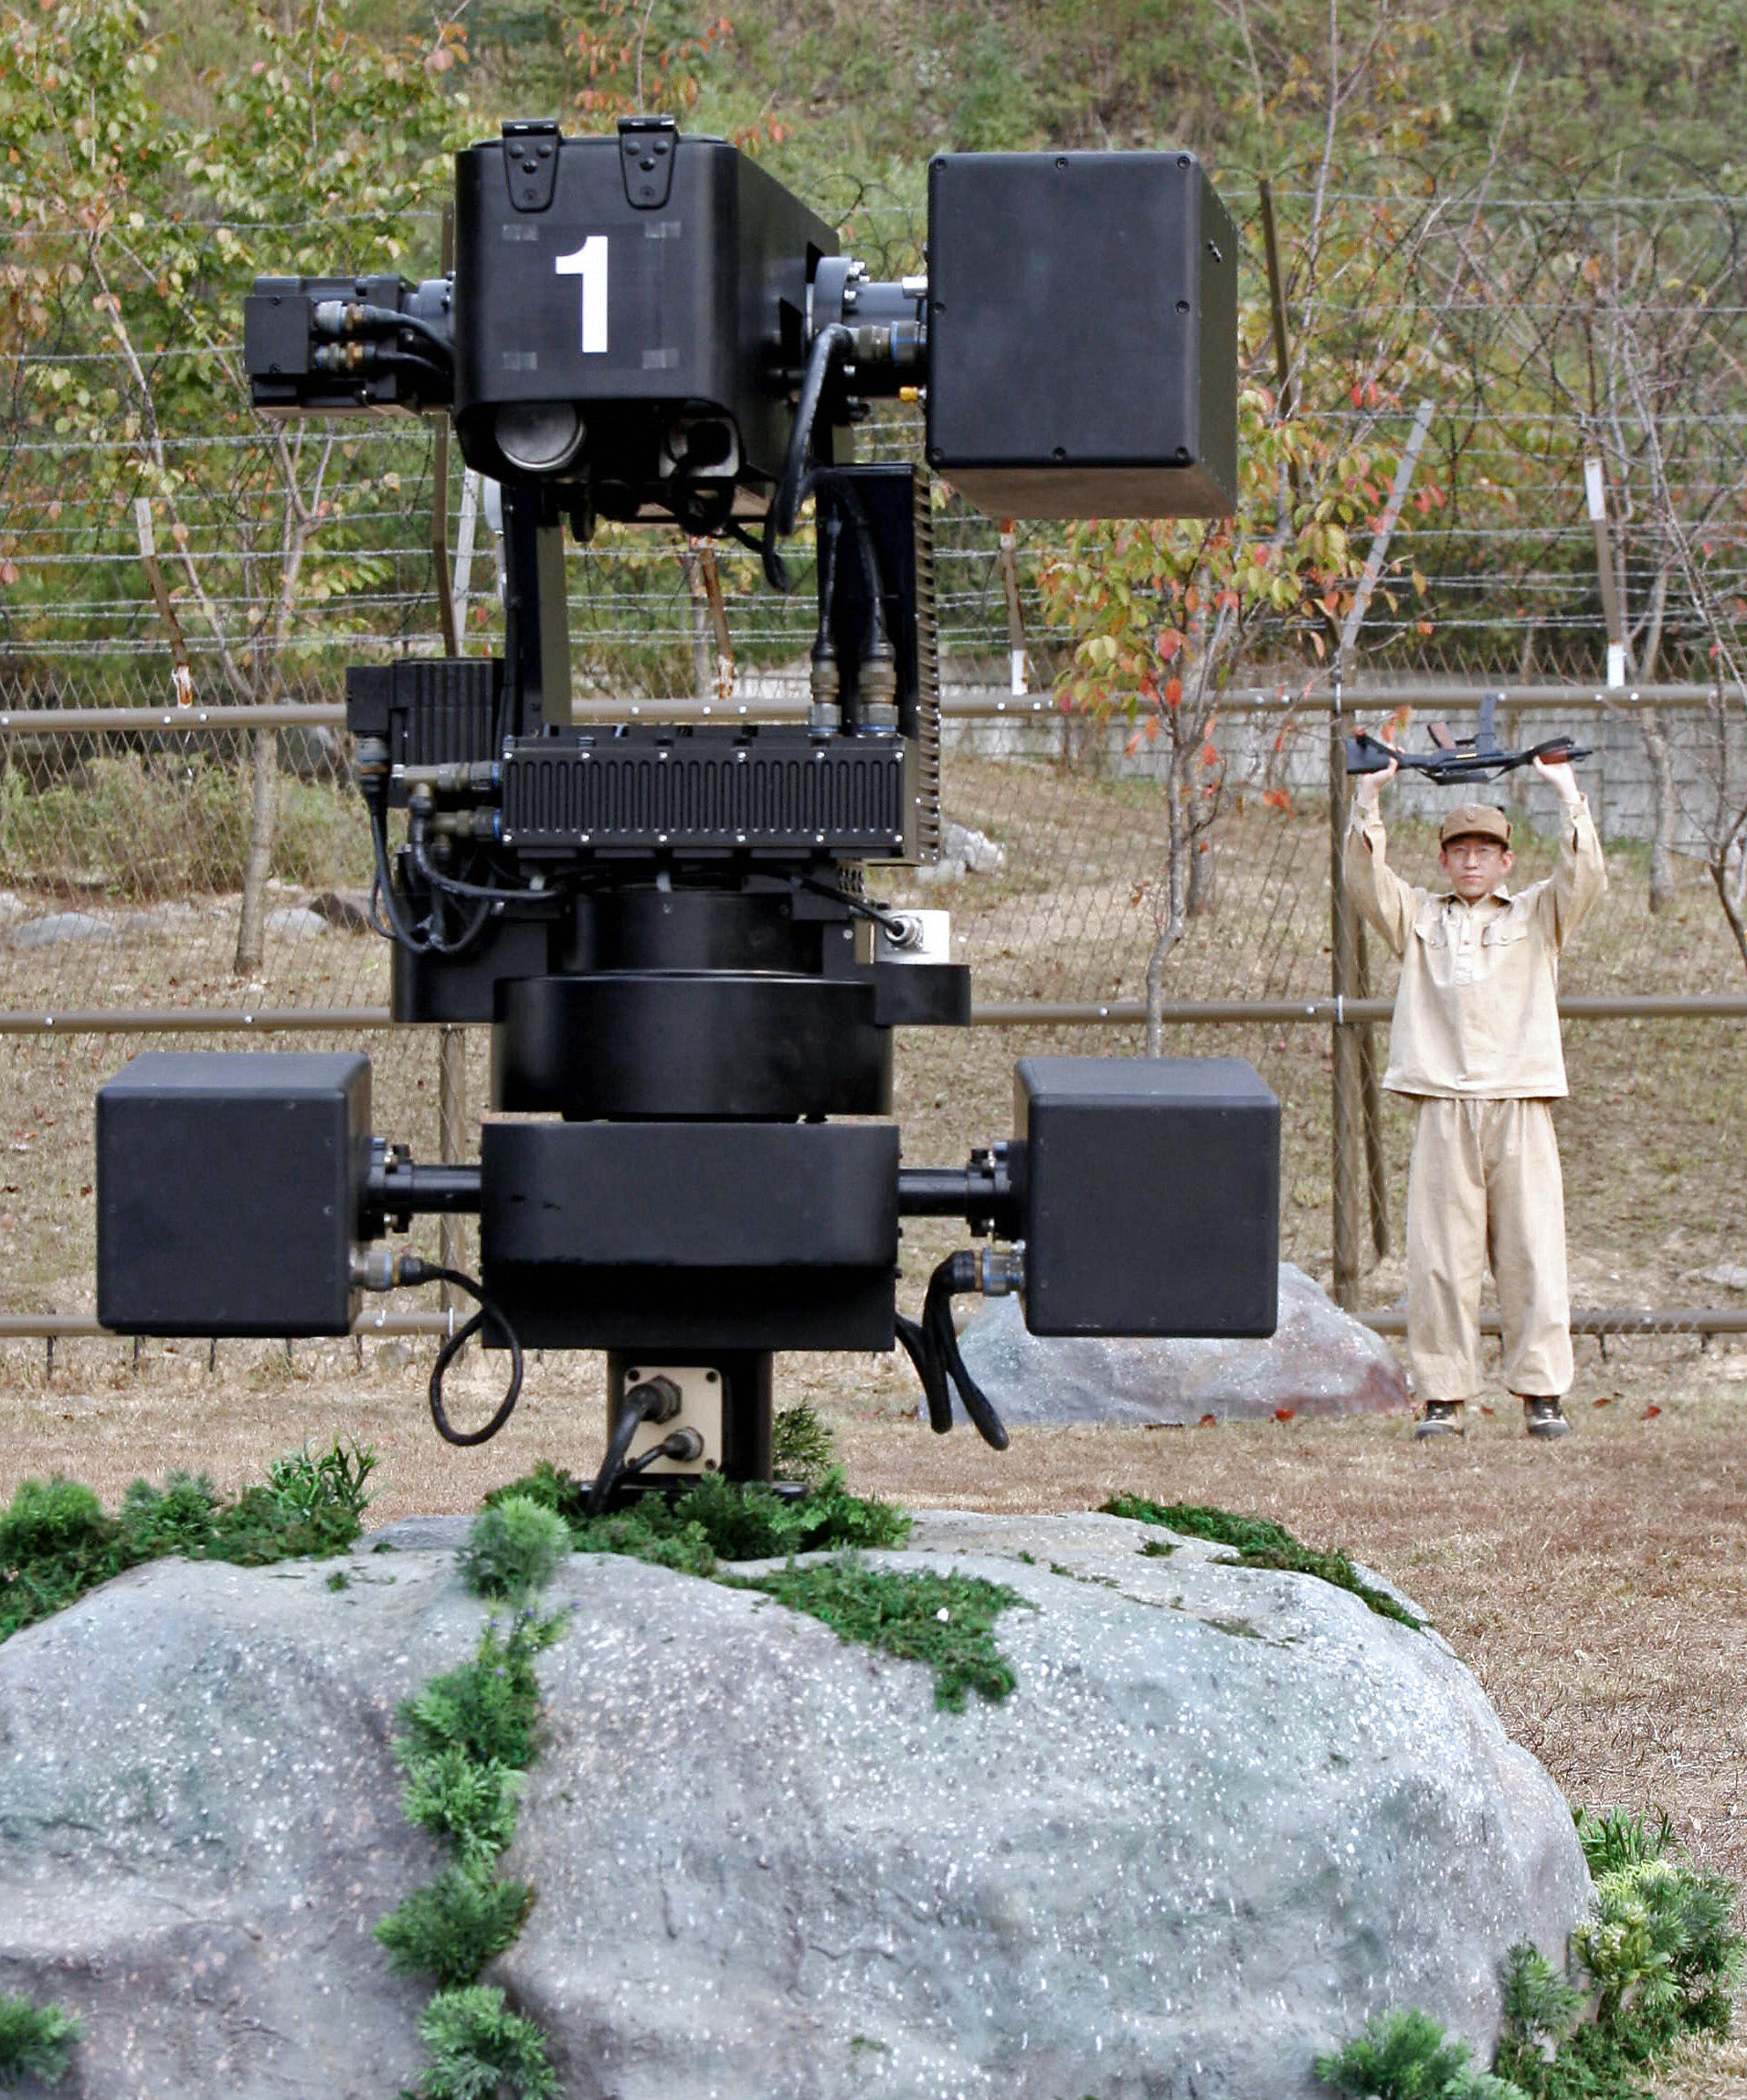 PHOTO: In 2010, South Korean officials announced the installation of several semi-autonomous robotic machine guns along the border with North Korea, similar to this one seen during testing in Cheonan in September, 2006.